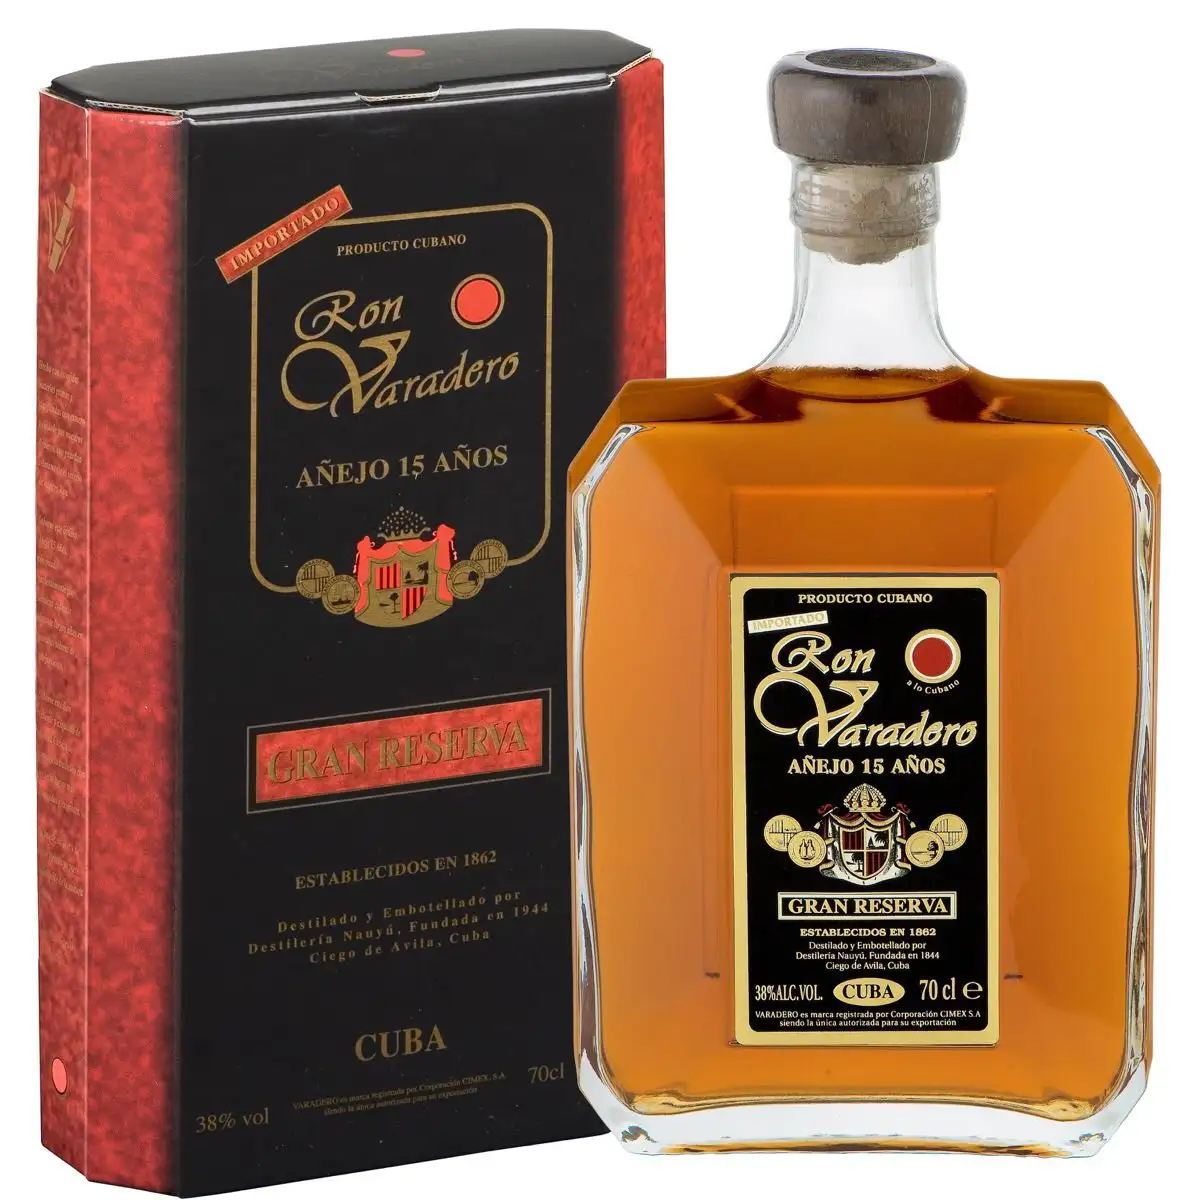 Image of the front of the bottle of the rum Gran Reserva Añejo 15 Años